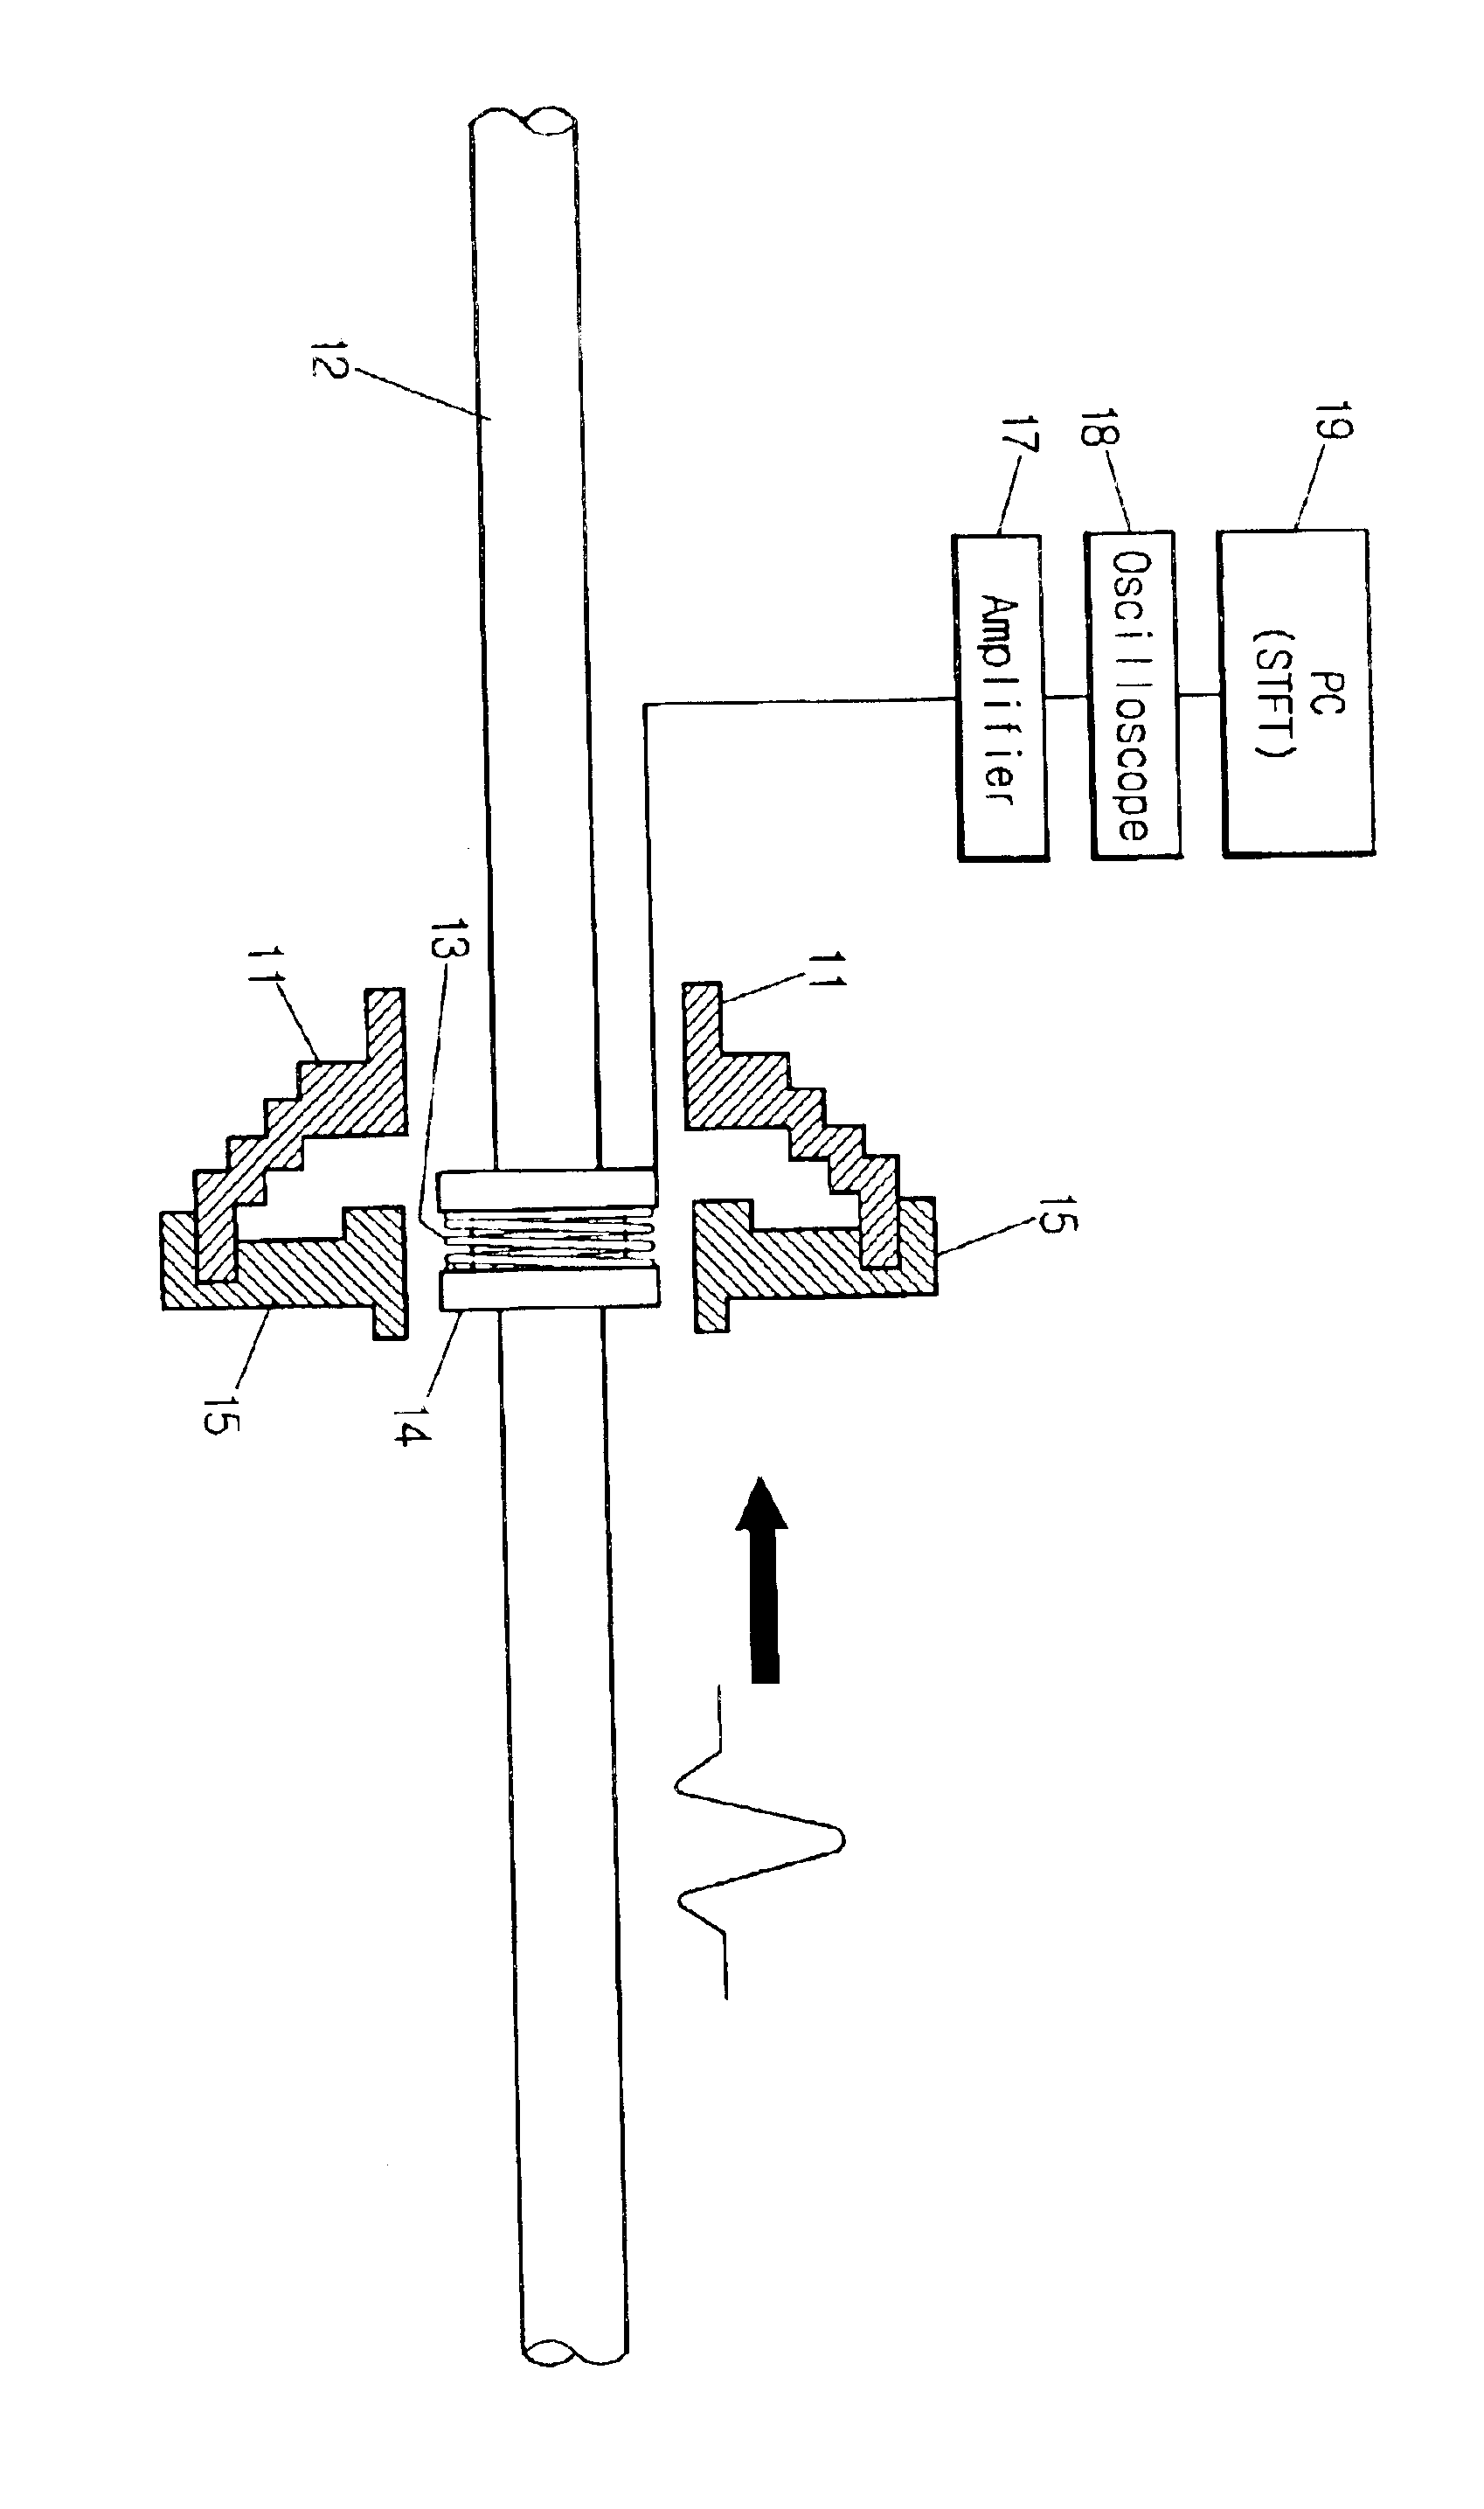 Methods and apparatus for measuring flexural wave and/or flexural vibration using a magnetostrictive sensor